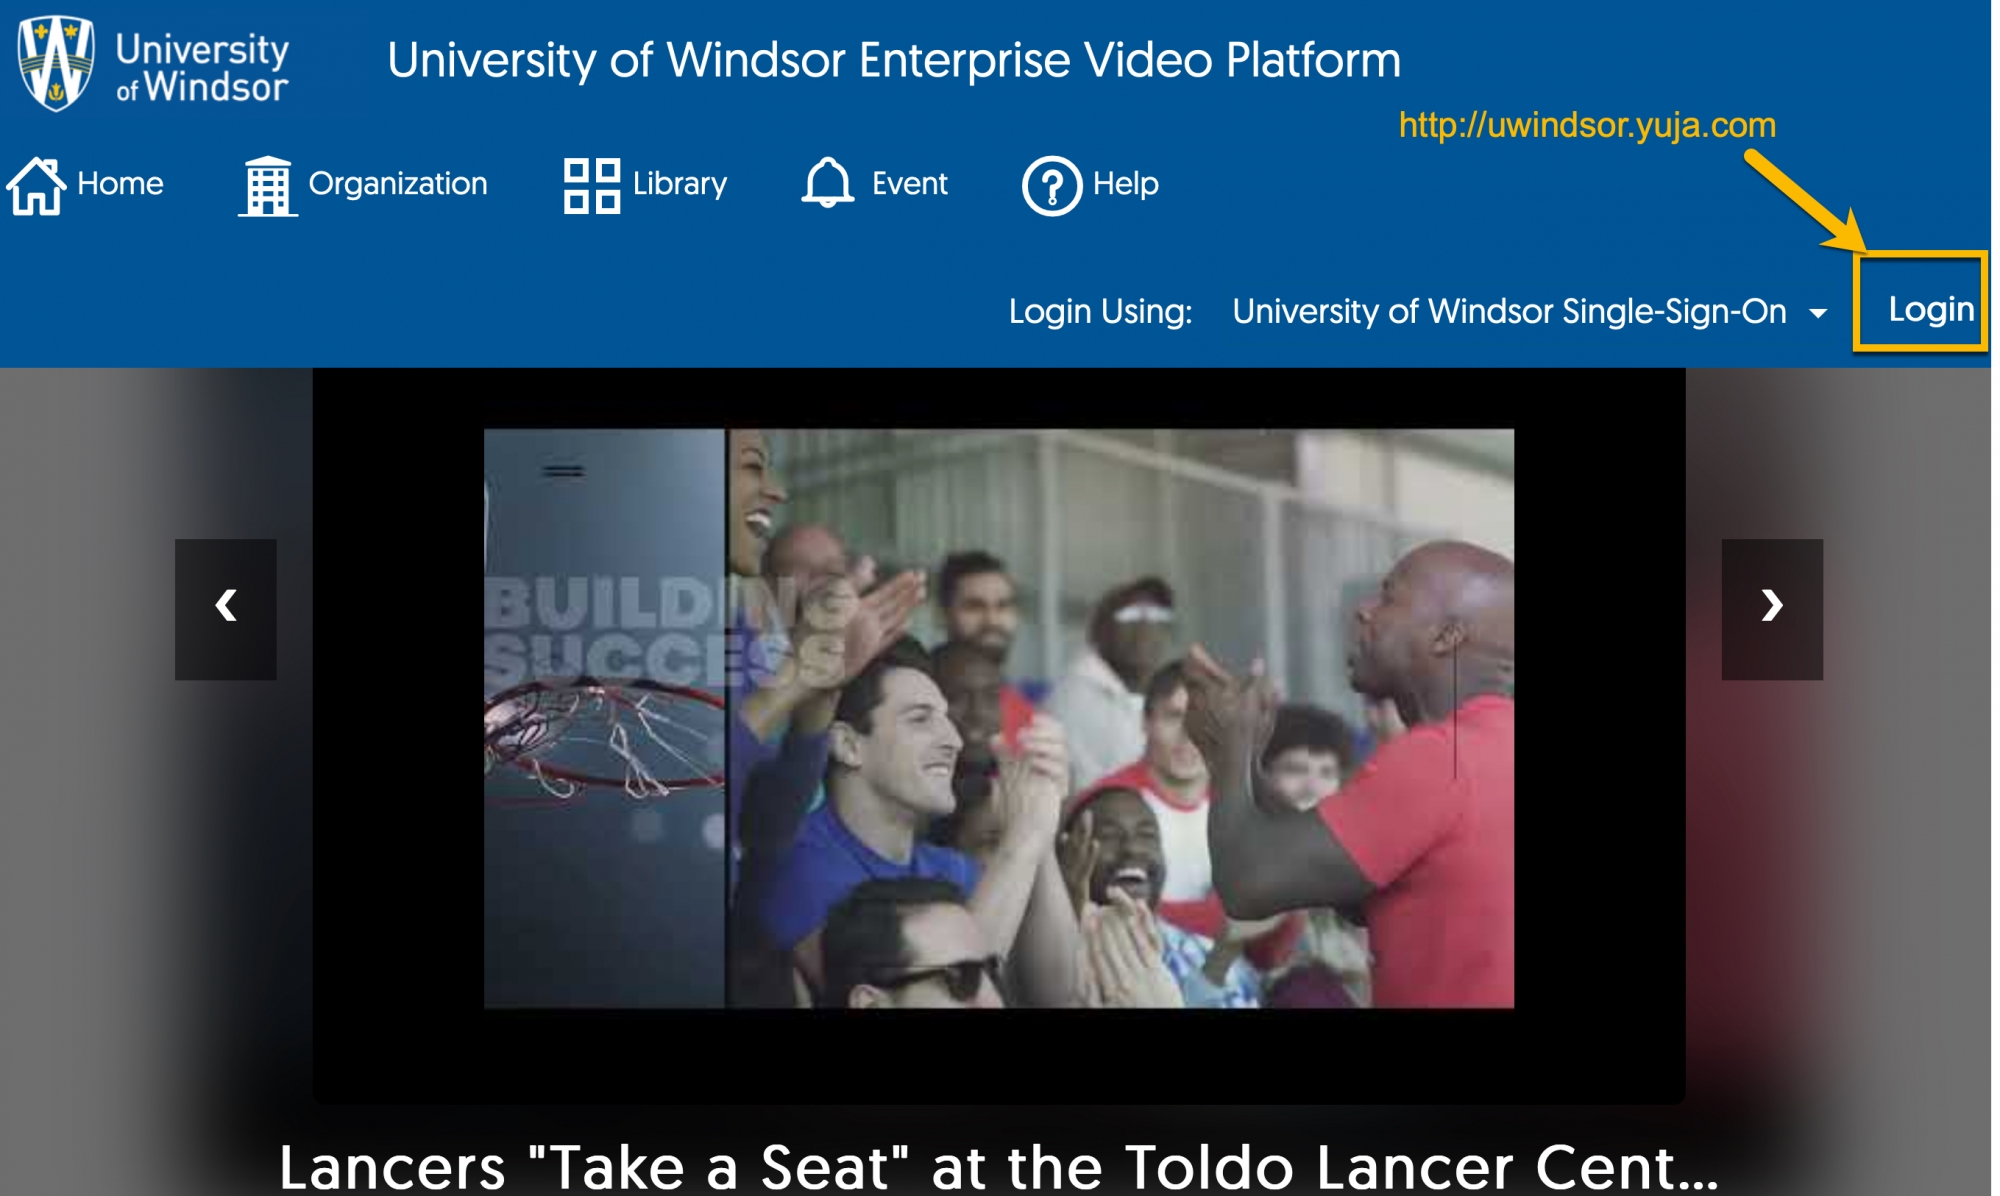 University of Windsor access page to YuJa Video Enterprise Platform at http://uwindsor.yuja.com and pointing to the login option in the top right part of the screen.  Use your UWinID and Password.